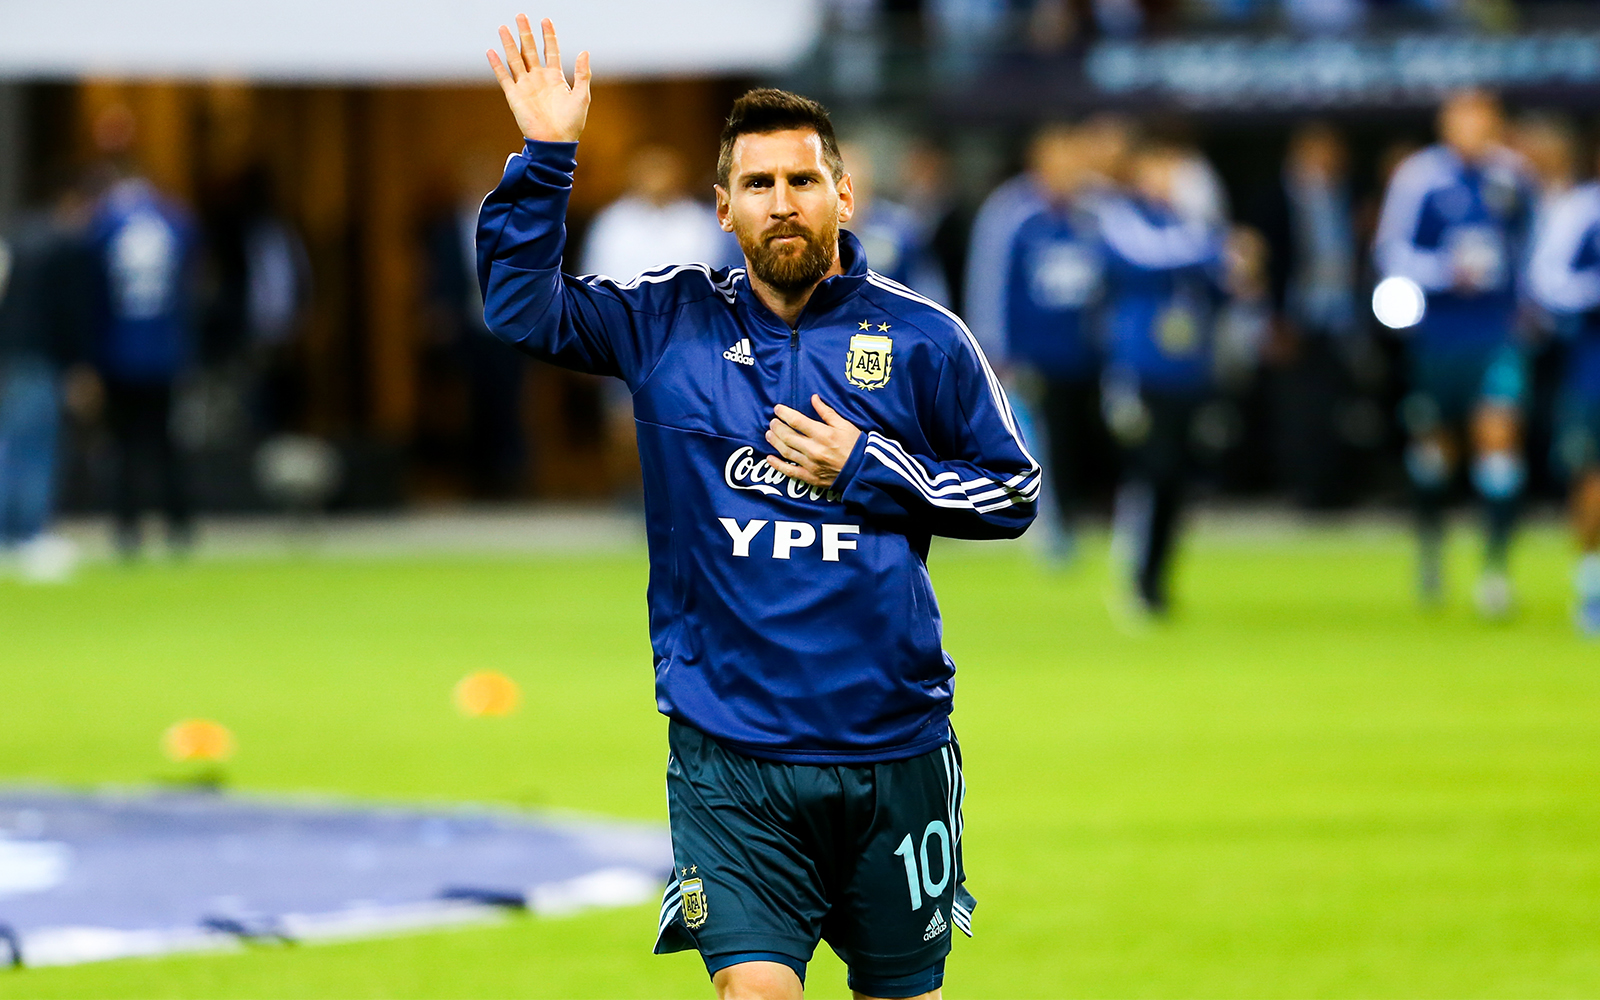 messi in argentina jersey